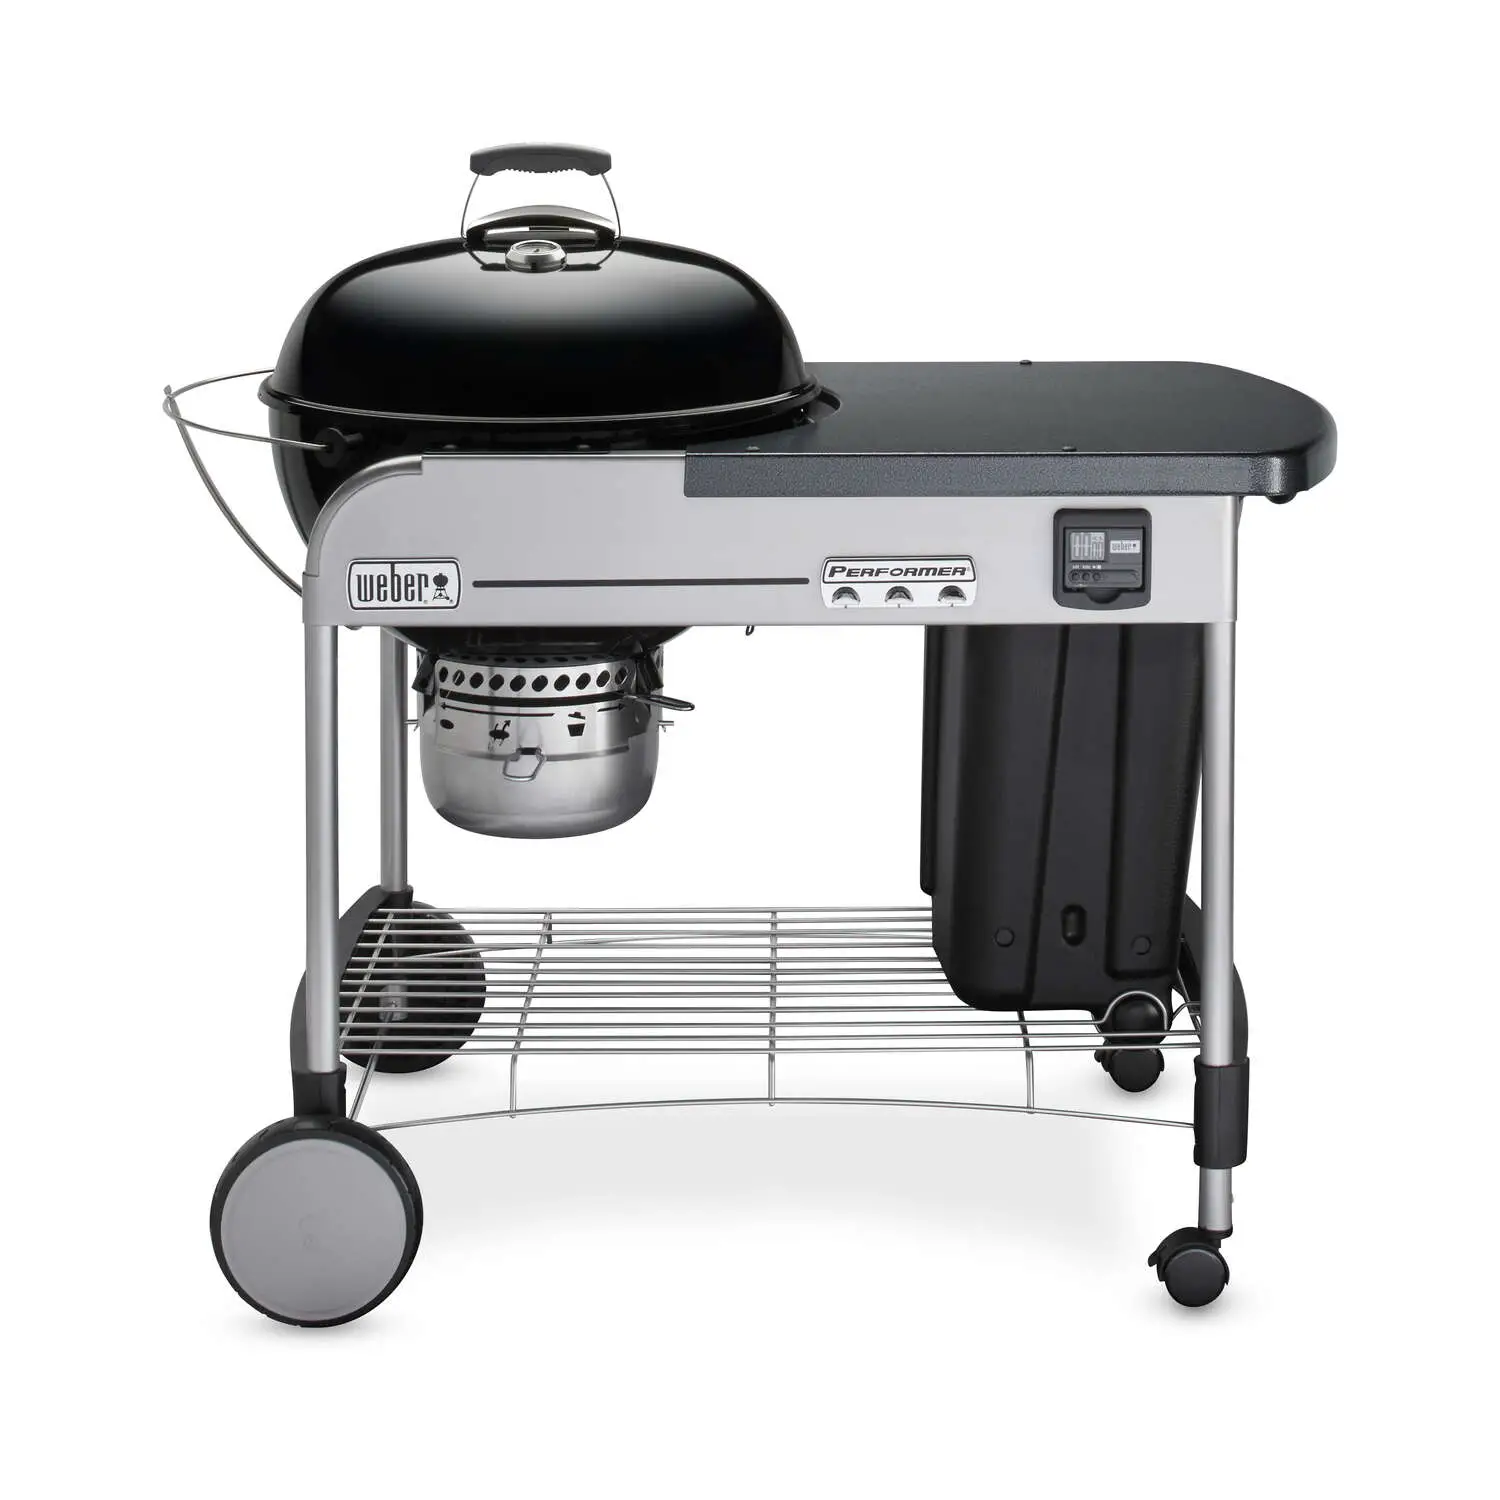 Weber 22 inch Performer Premium Charcoal Grill Black